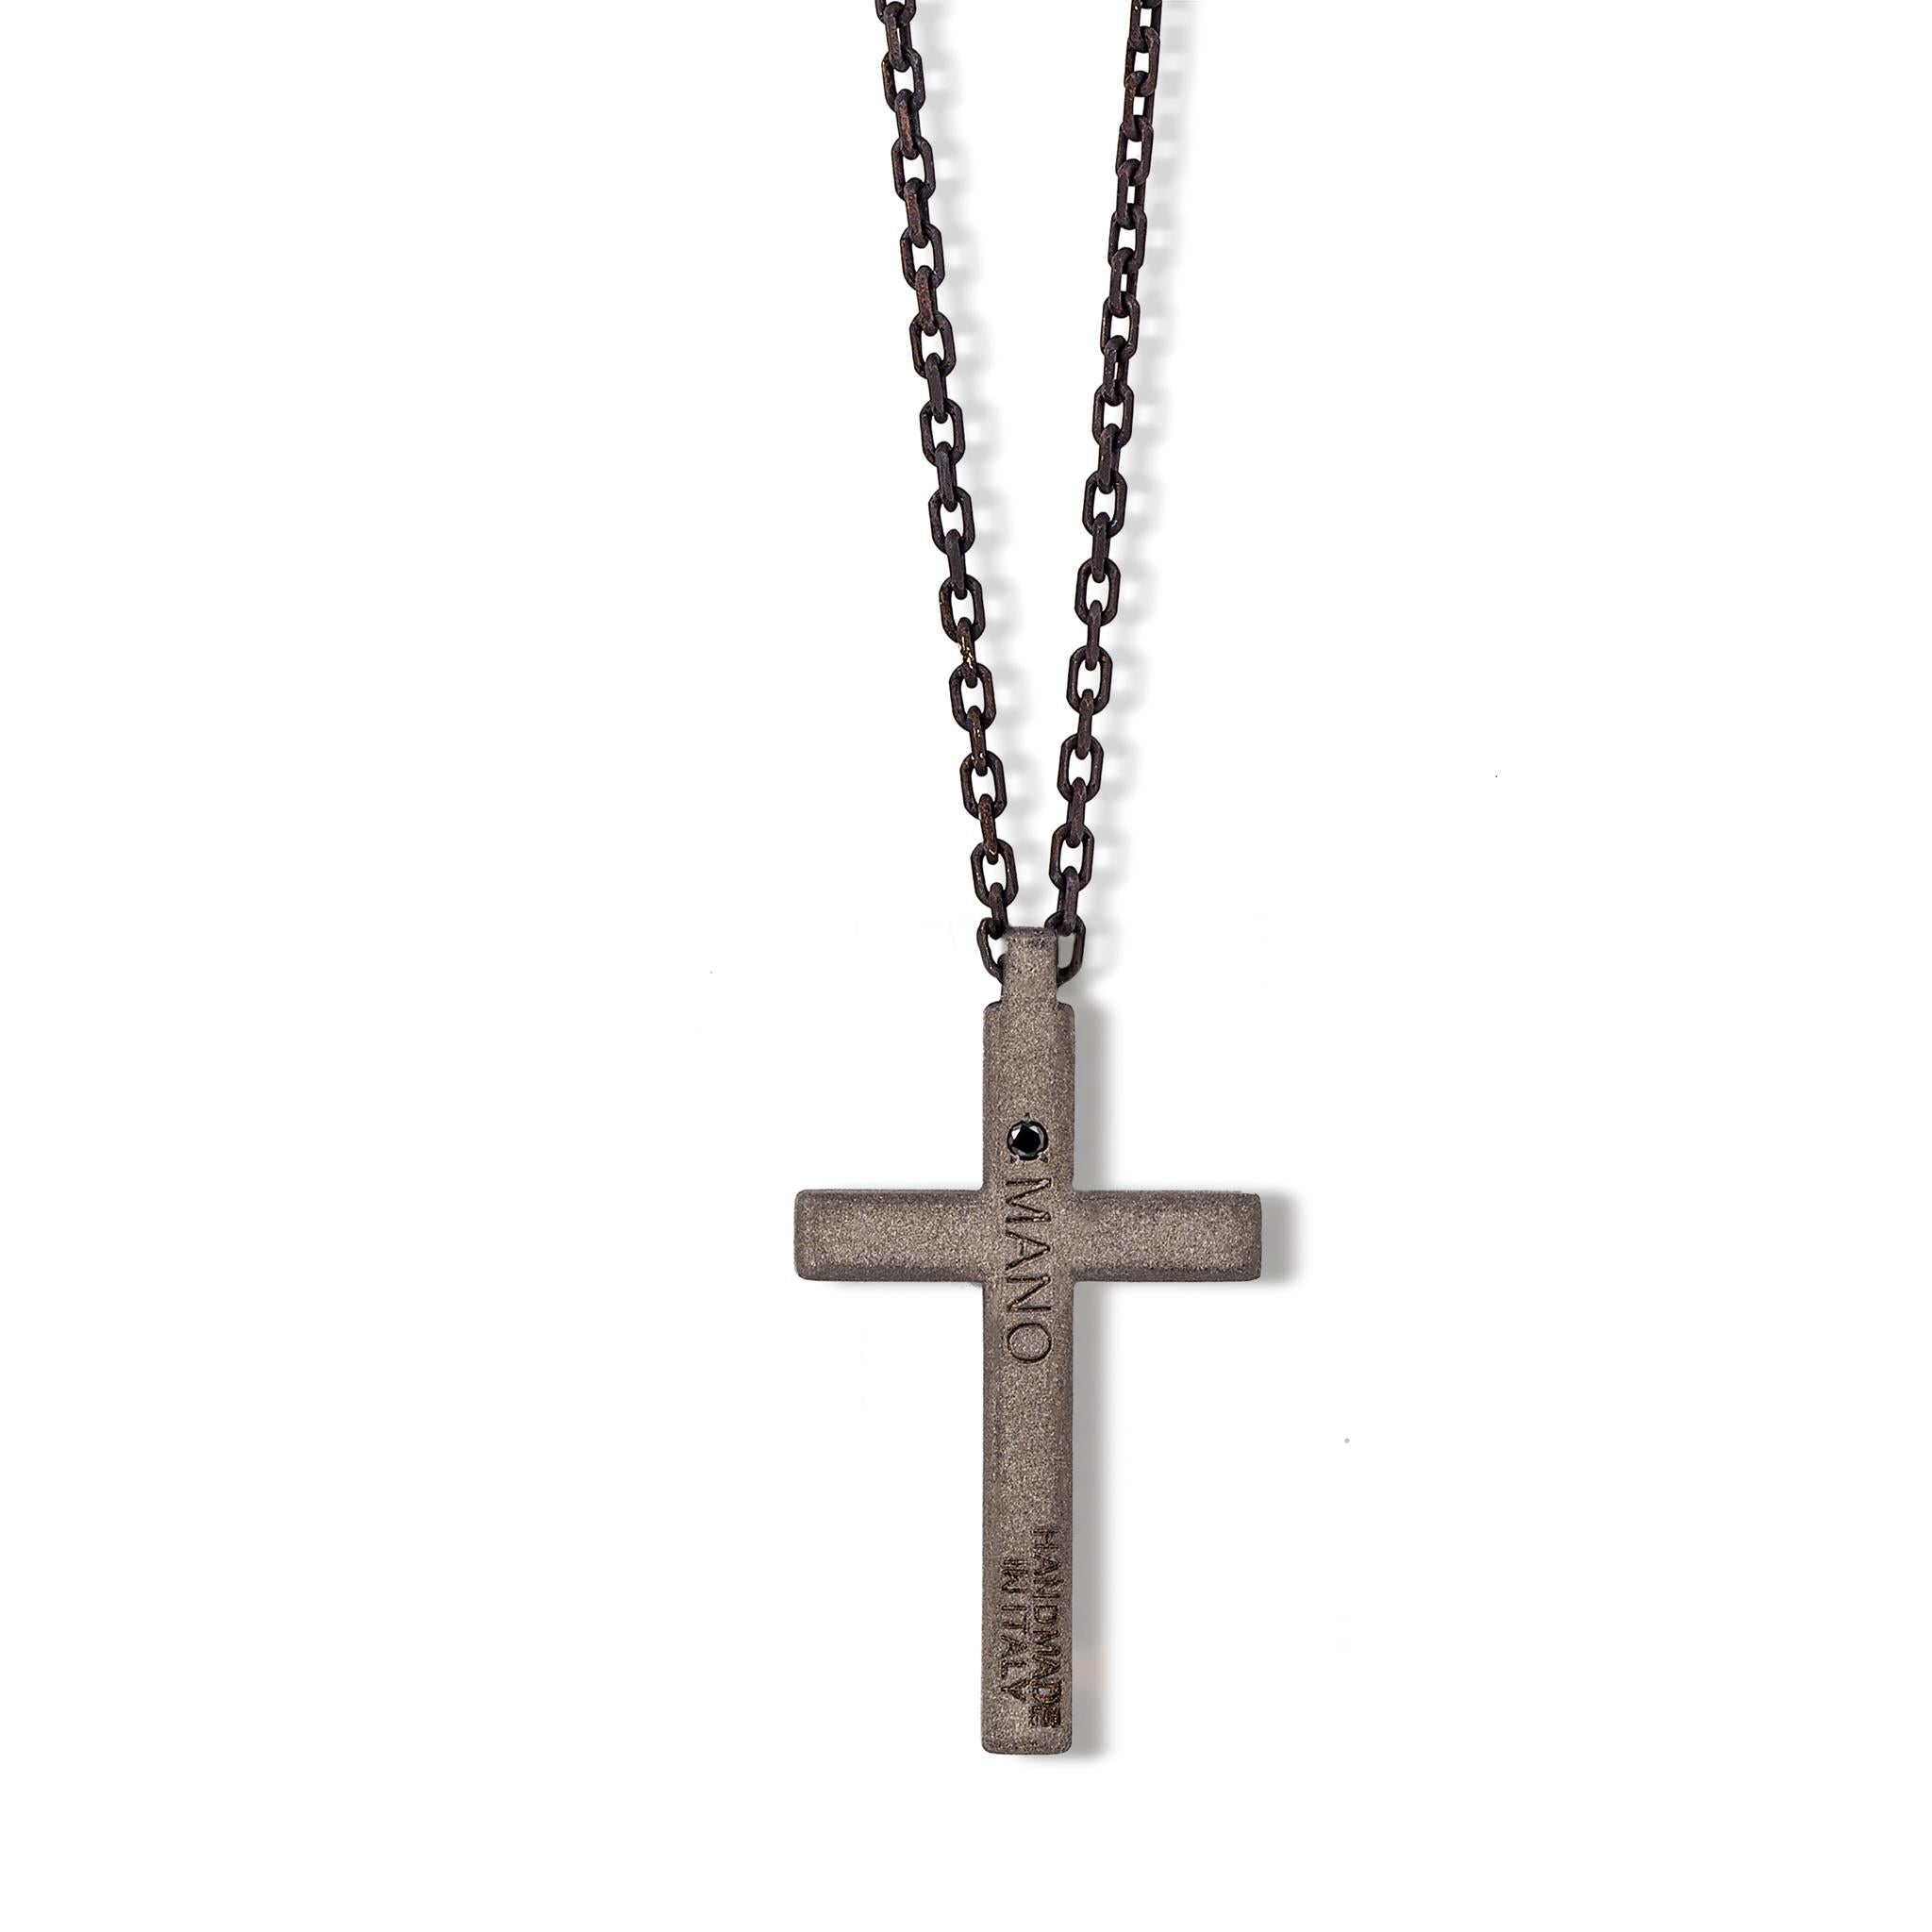 Men's necklace in titanium,white diamonds,9 kt red gold and chain. The titanium cross is set with 4 white diamonds for a total carat of 4 points. Through a loop above the cross passes a silver chain on the end of which are two 9 kt red gold links